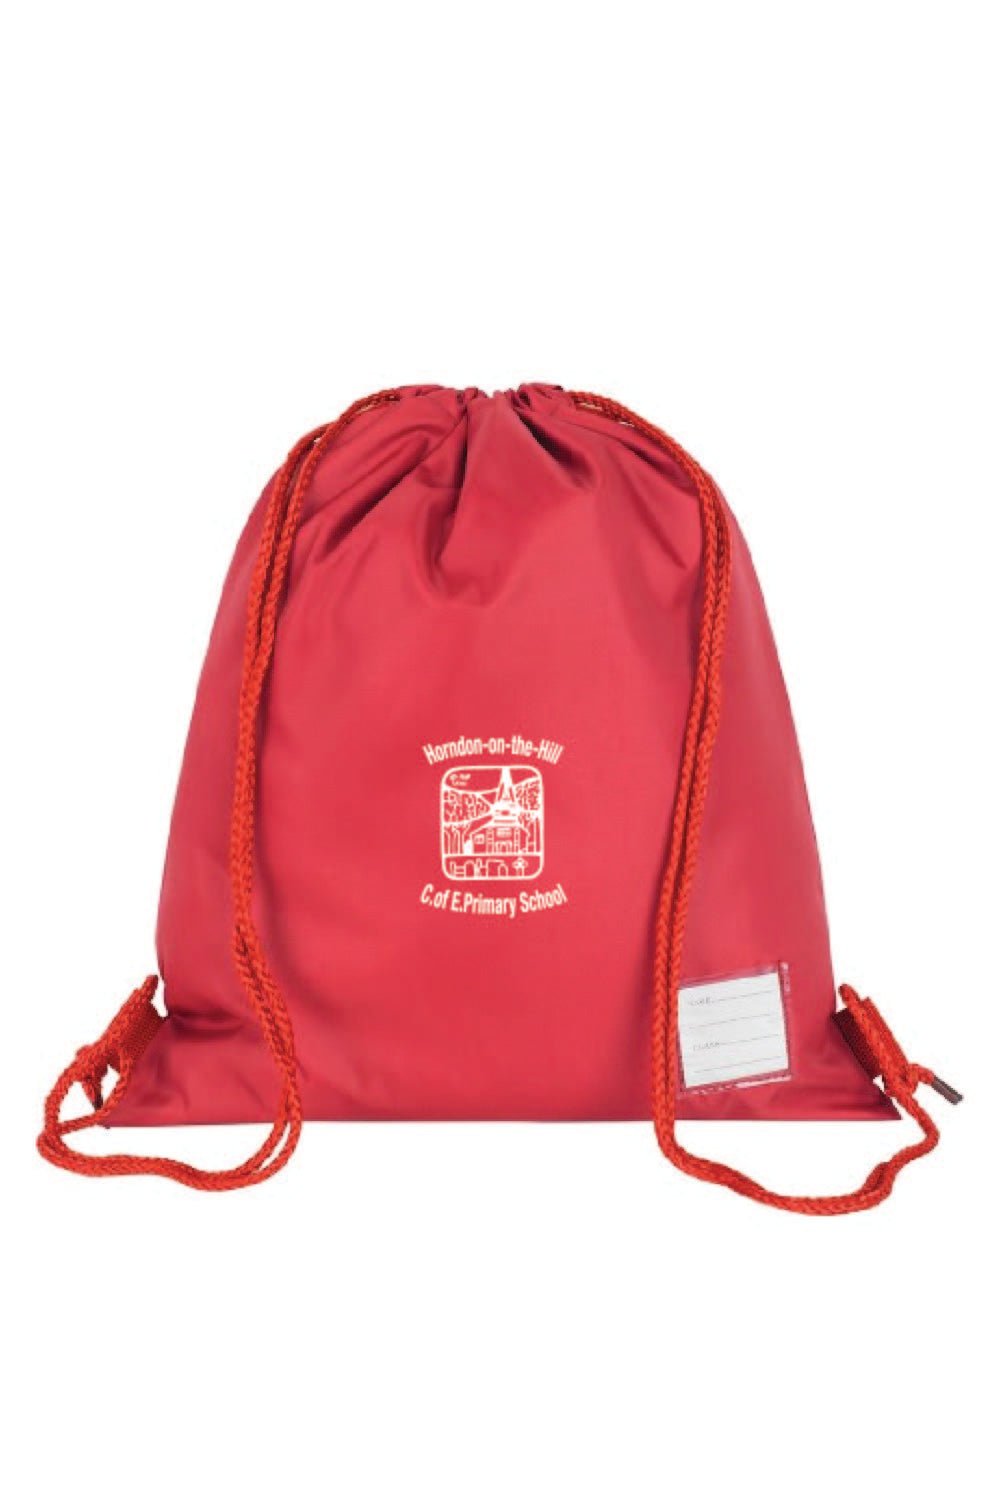 Horndon-on-the-Hill PE Bag - Uniformwise Schoolwear